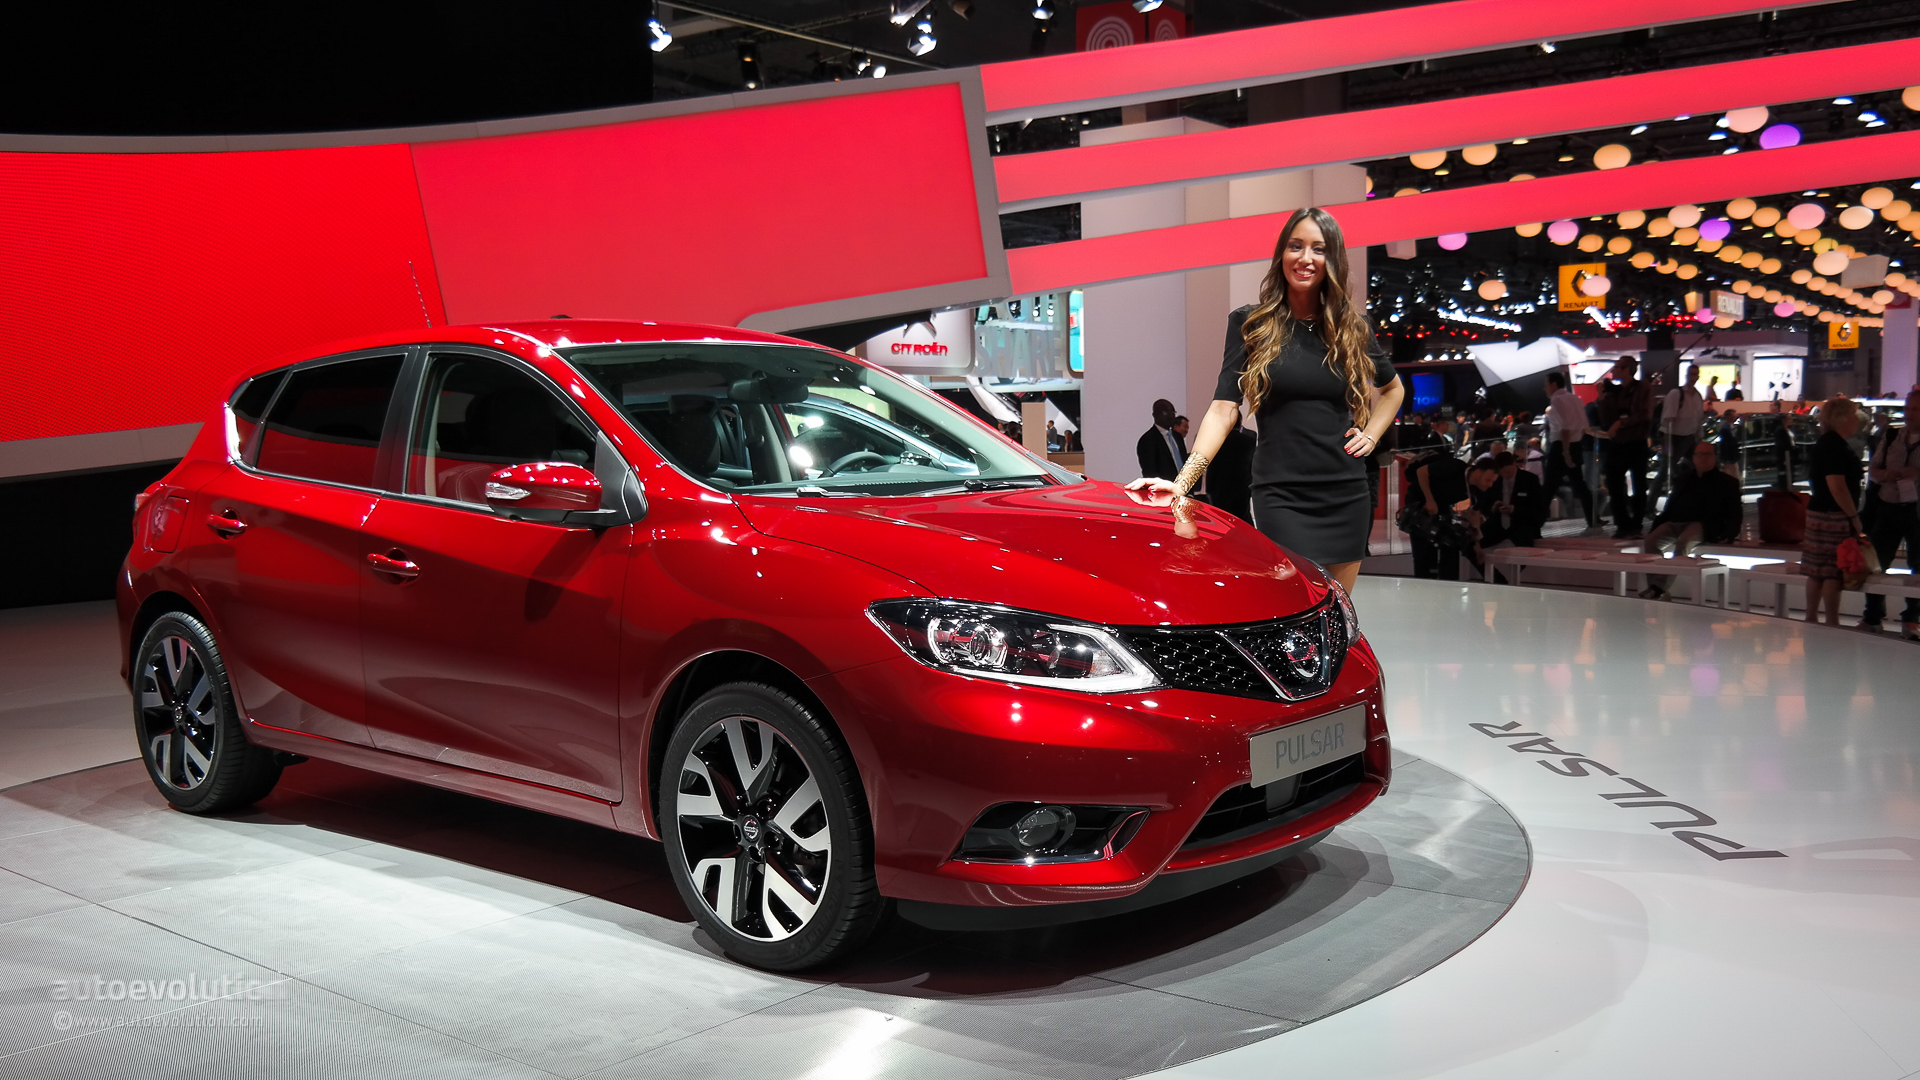 nissan-pulsar-completes-the-companys-line-up-at-paris-photo-gallery_4